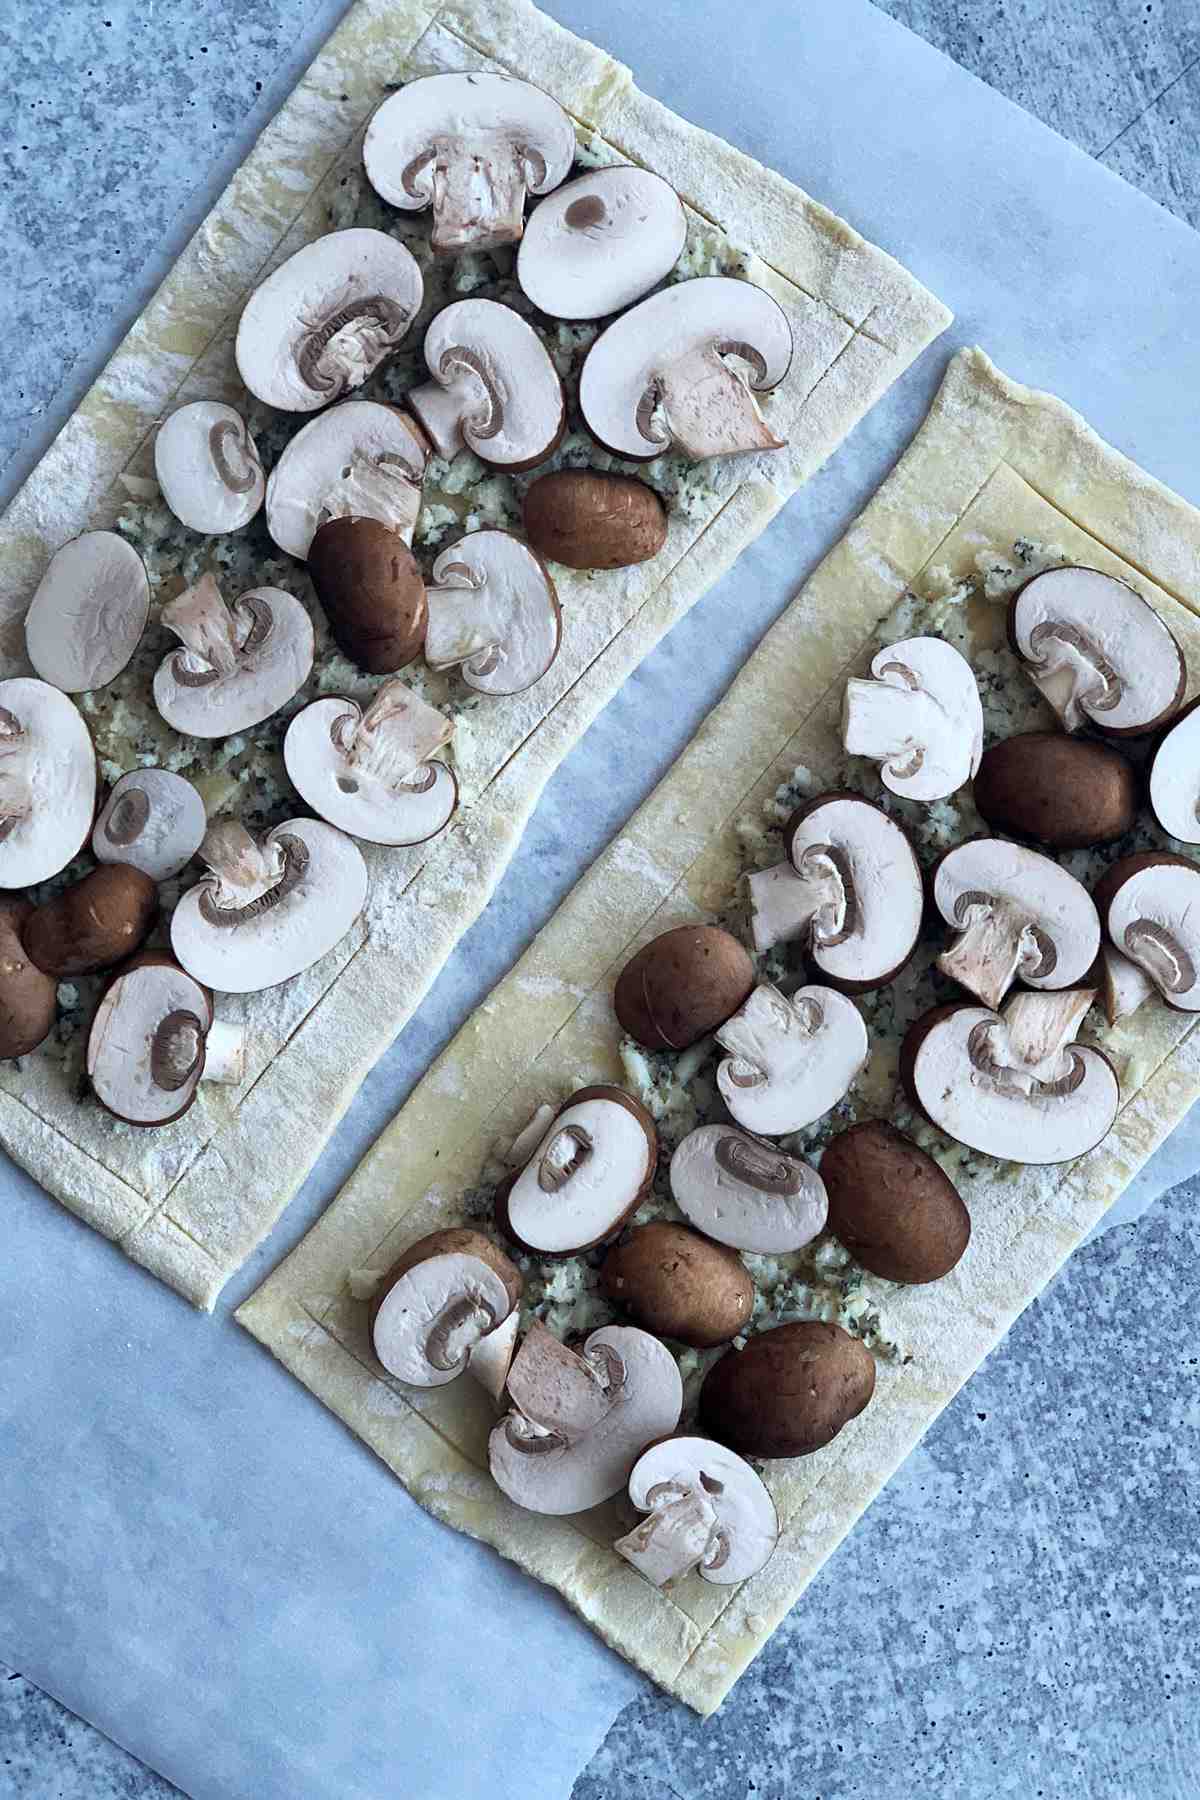 Puff pastry with mushrooms on top.